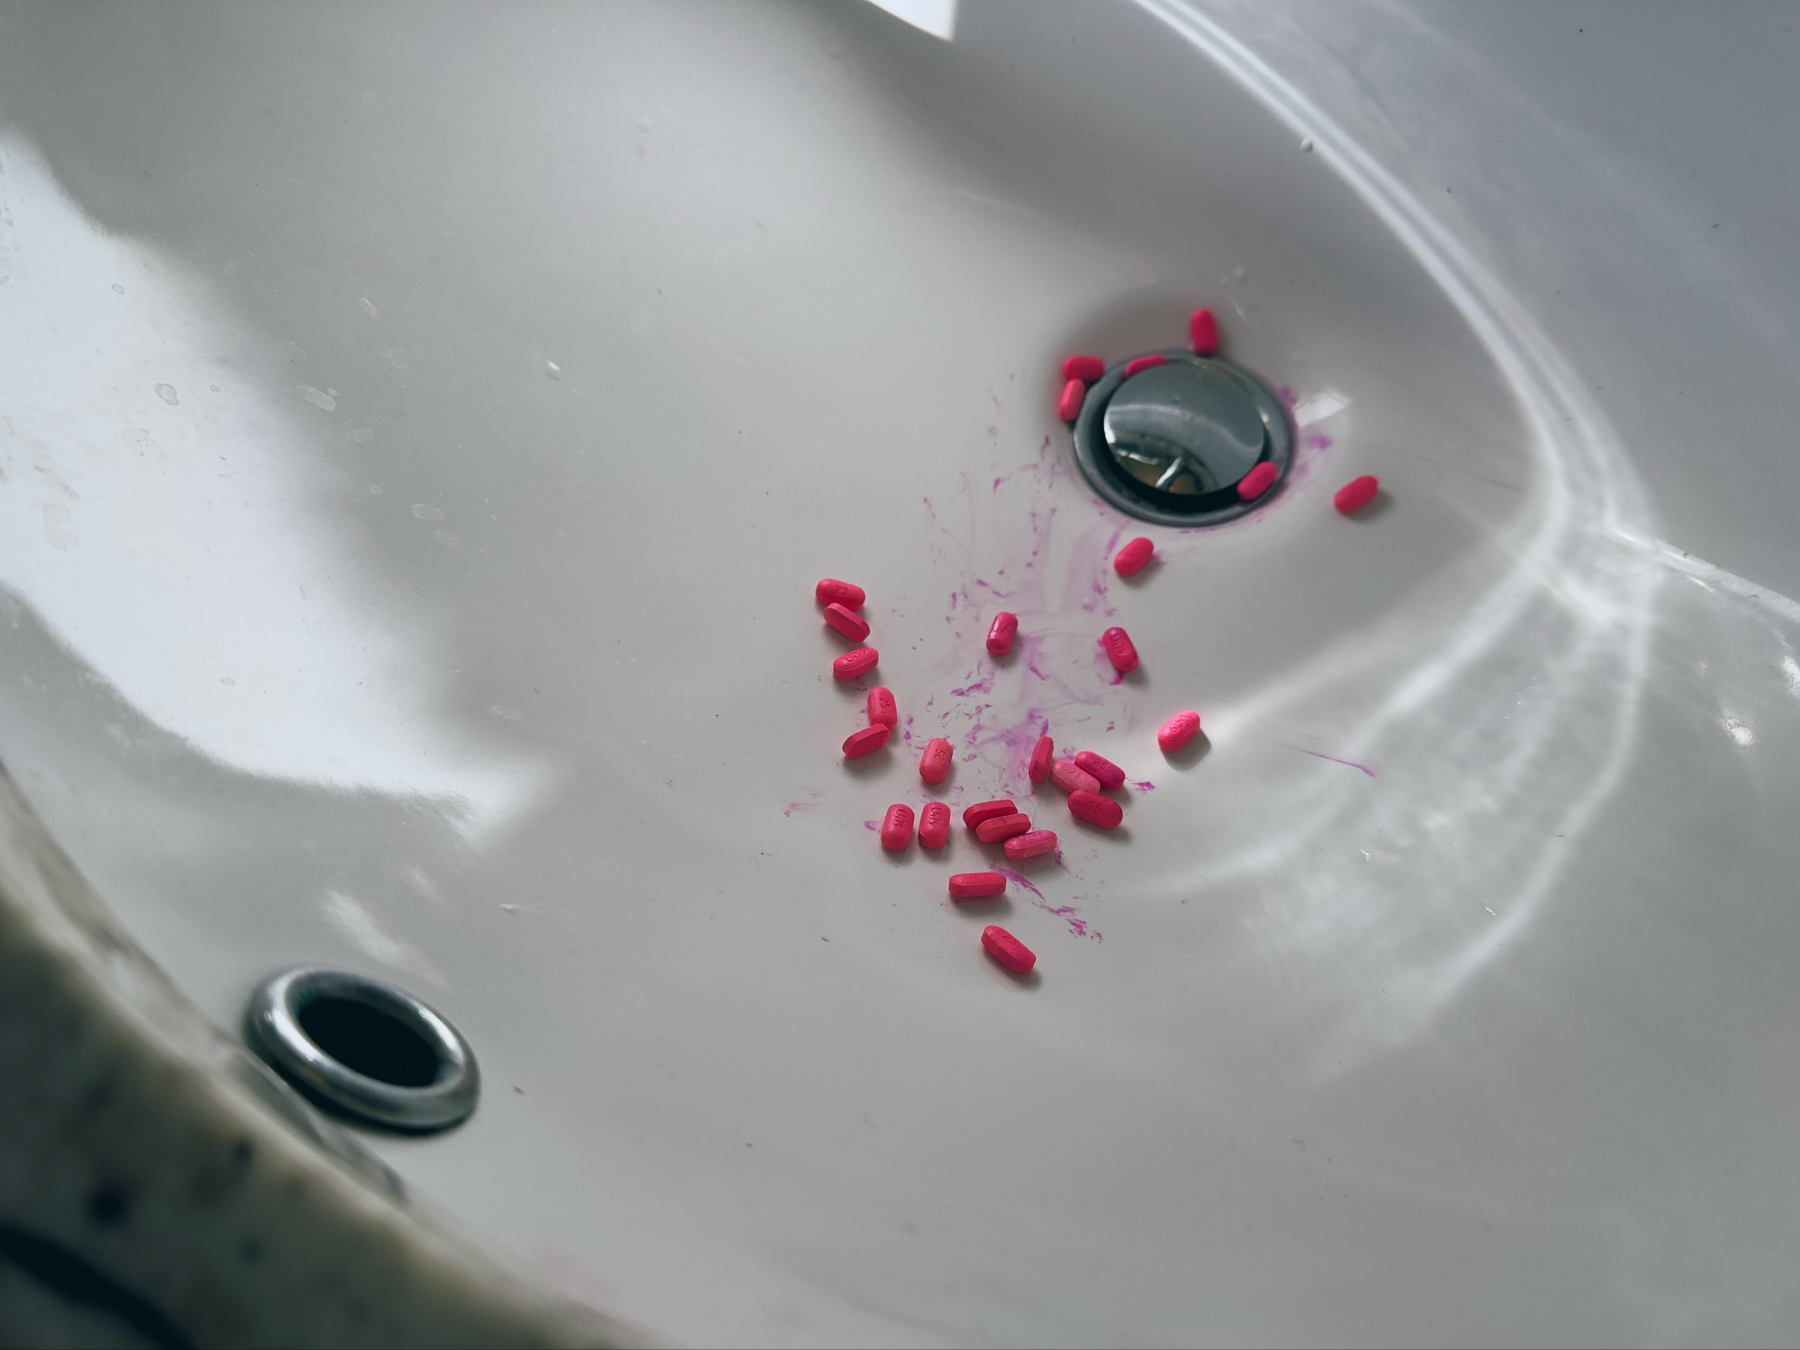 I spilled a bunch of tiny pink Benadryl pills into a wet sink. Lots of pink streaks in the sink from me trying to scoop up the slippery guys. 